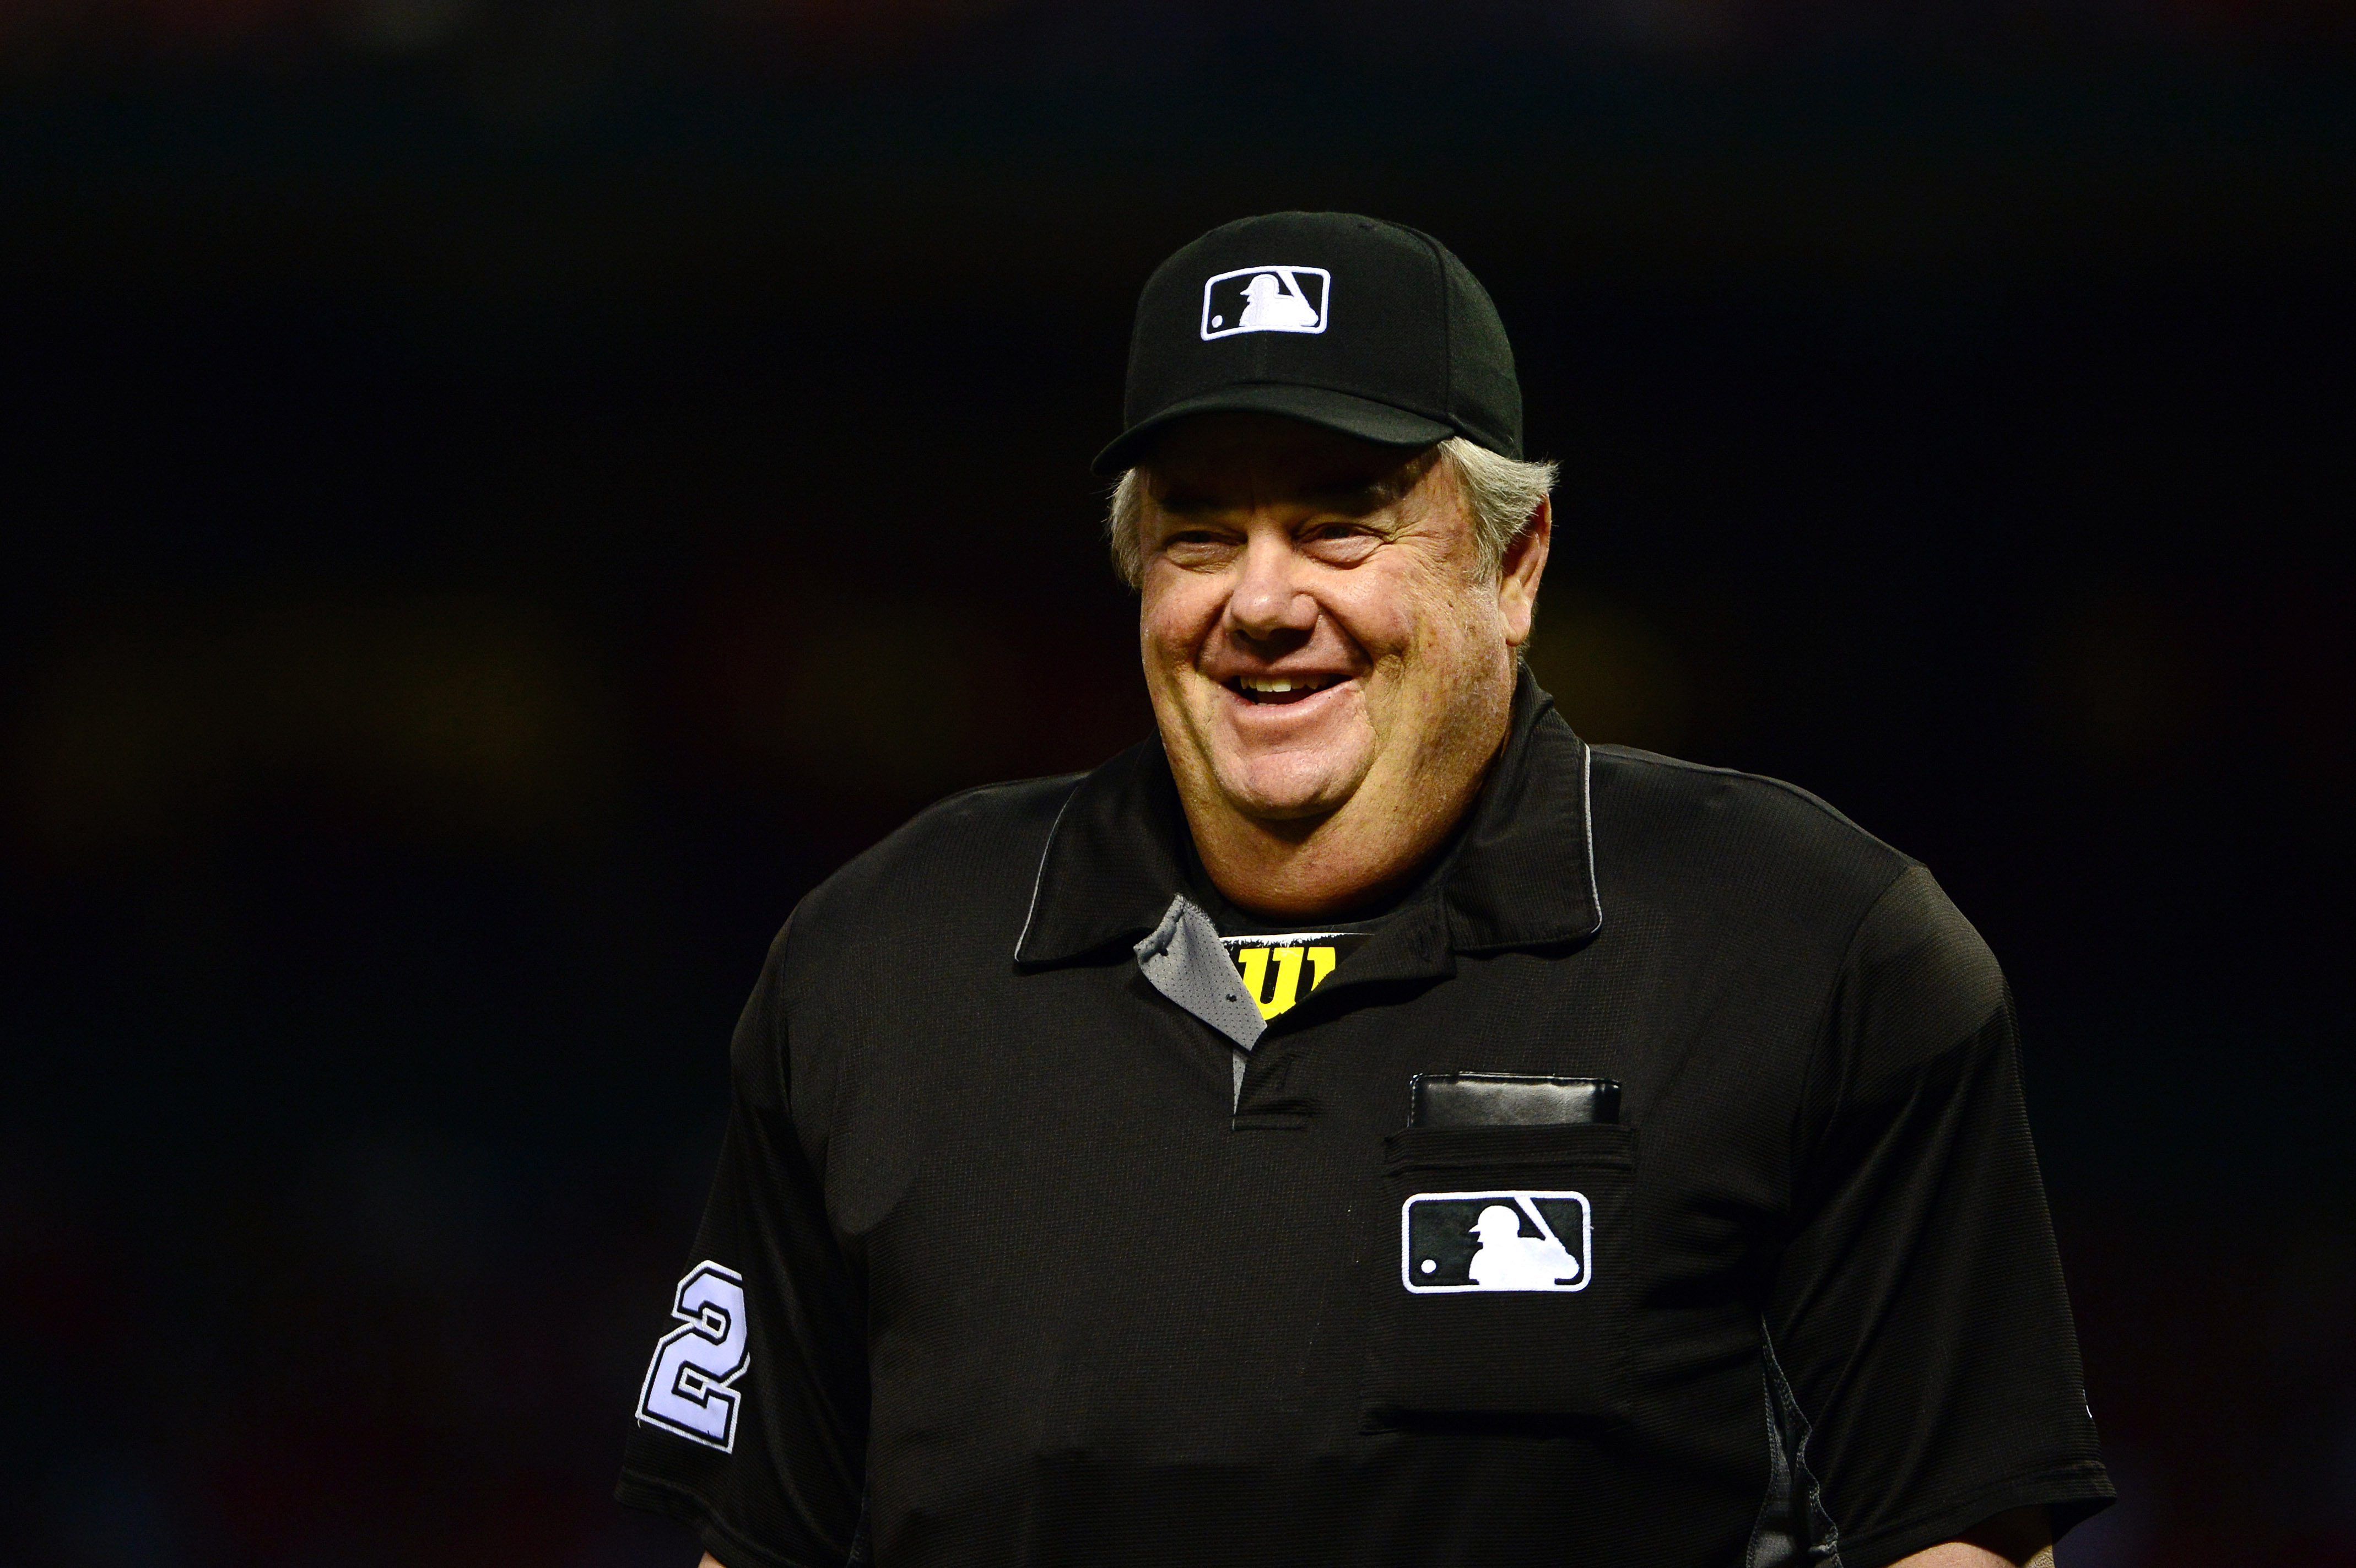 Legendary umpire Joe West dishes on players, managers and replay at 5,000th  game